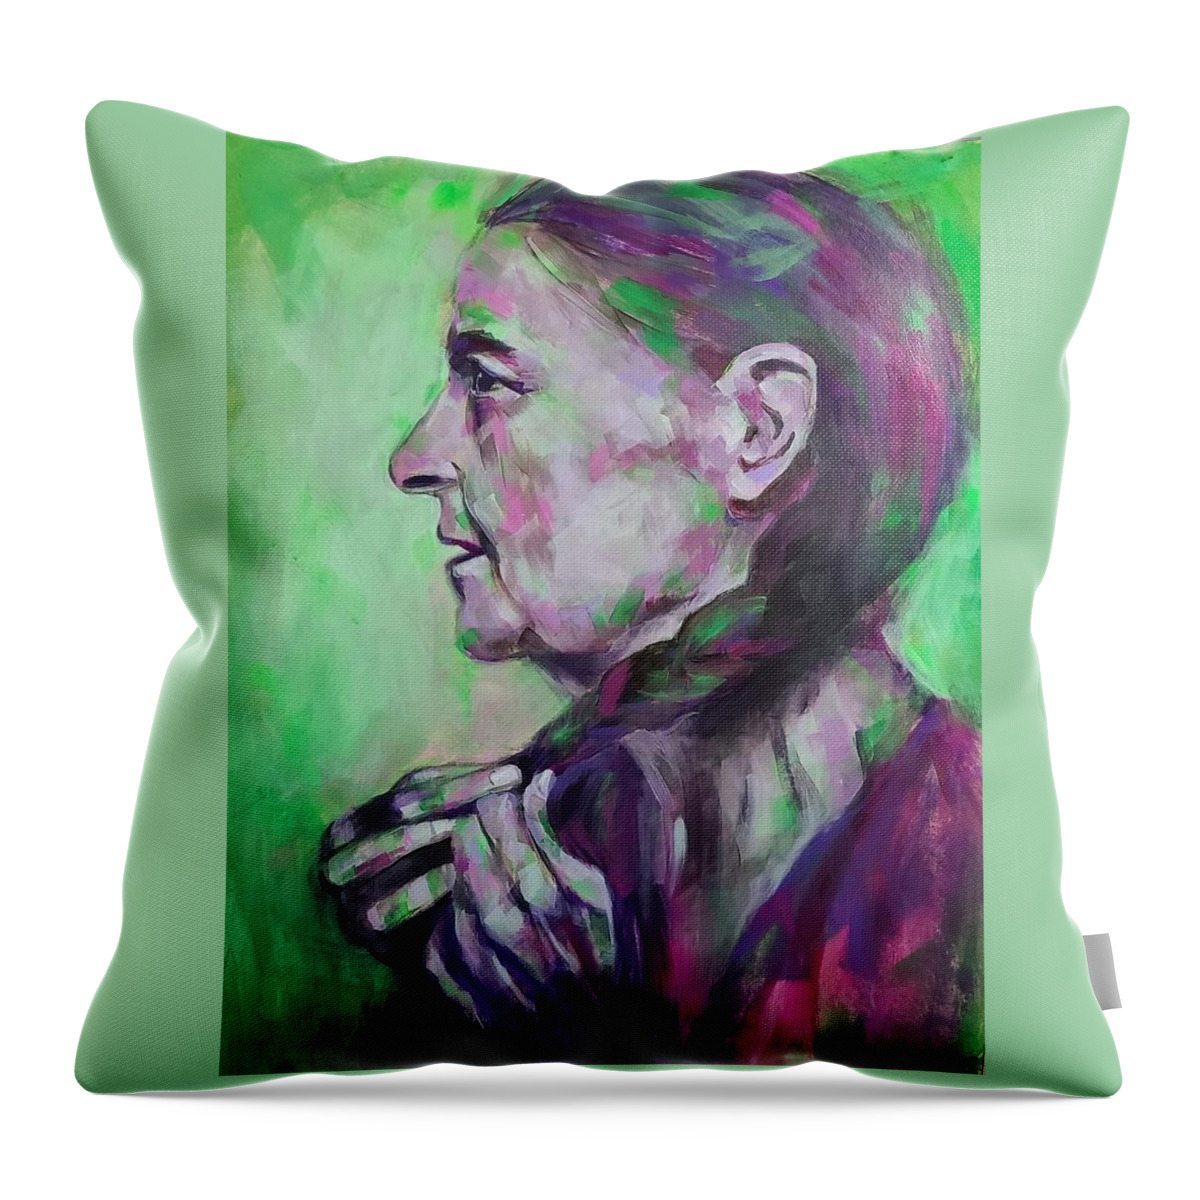  Throw Pillow featuring the painting Contemplation by Luzdy Rivera